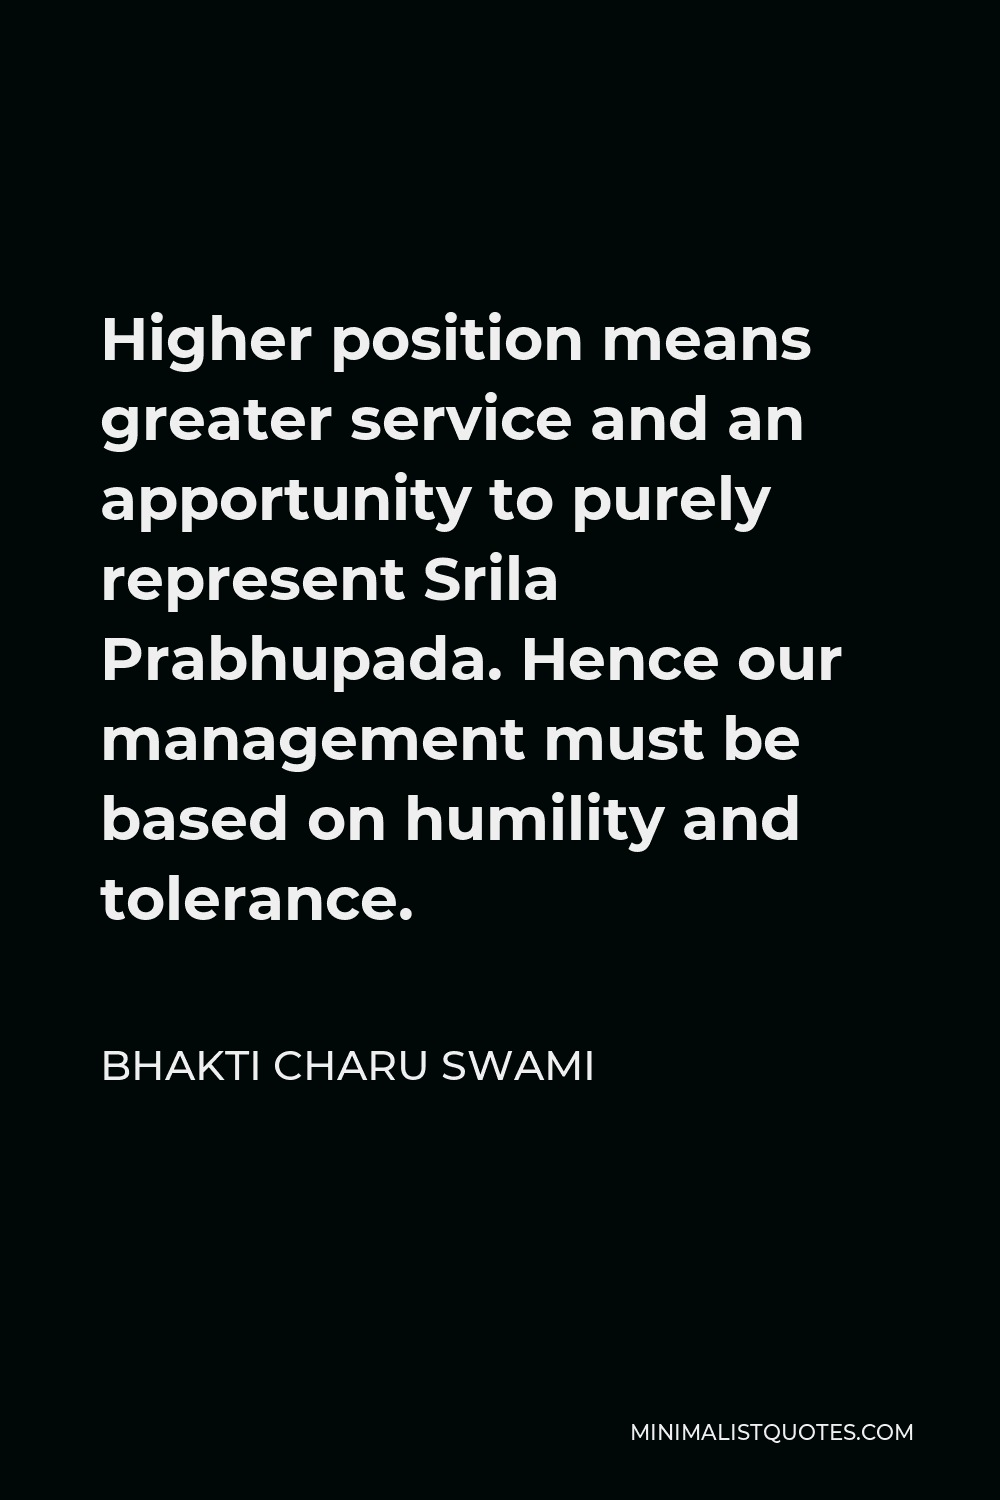 Bhakti Charu Swami Quote - Higher position means greater service and an apportunity to purely represent Srila Prabhupada. Hence our management must be based on humility and tolerance.